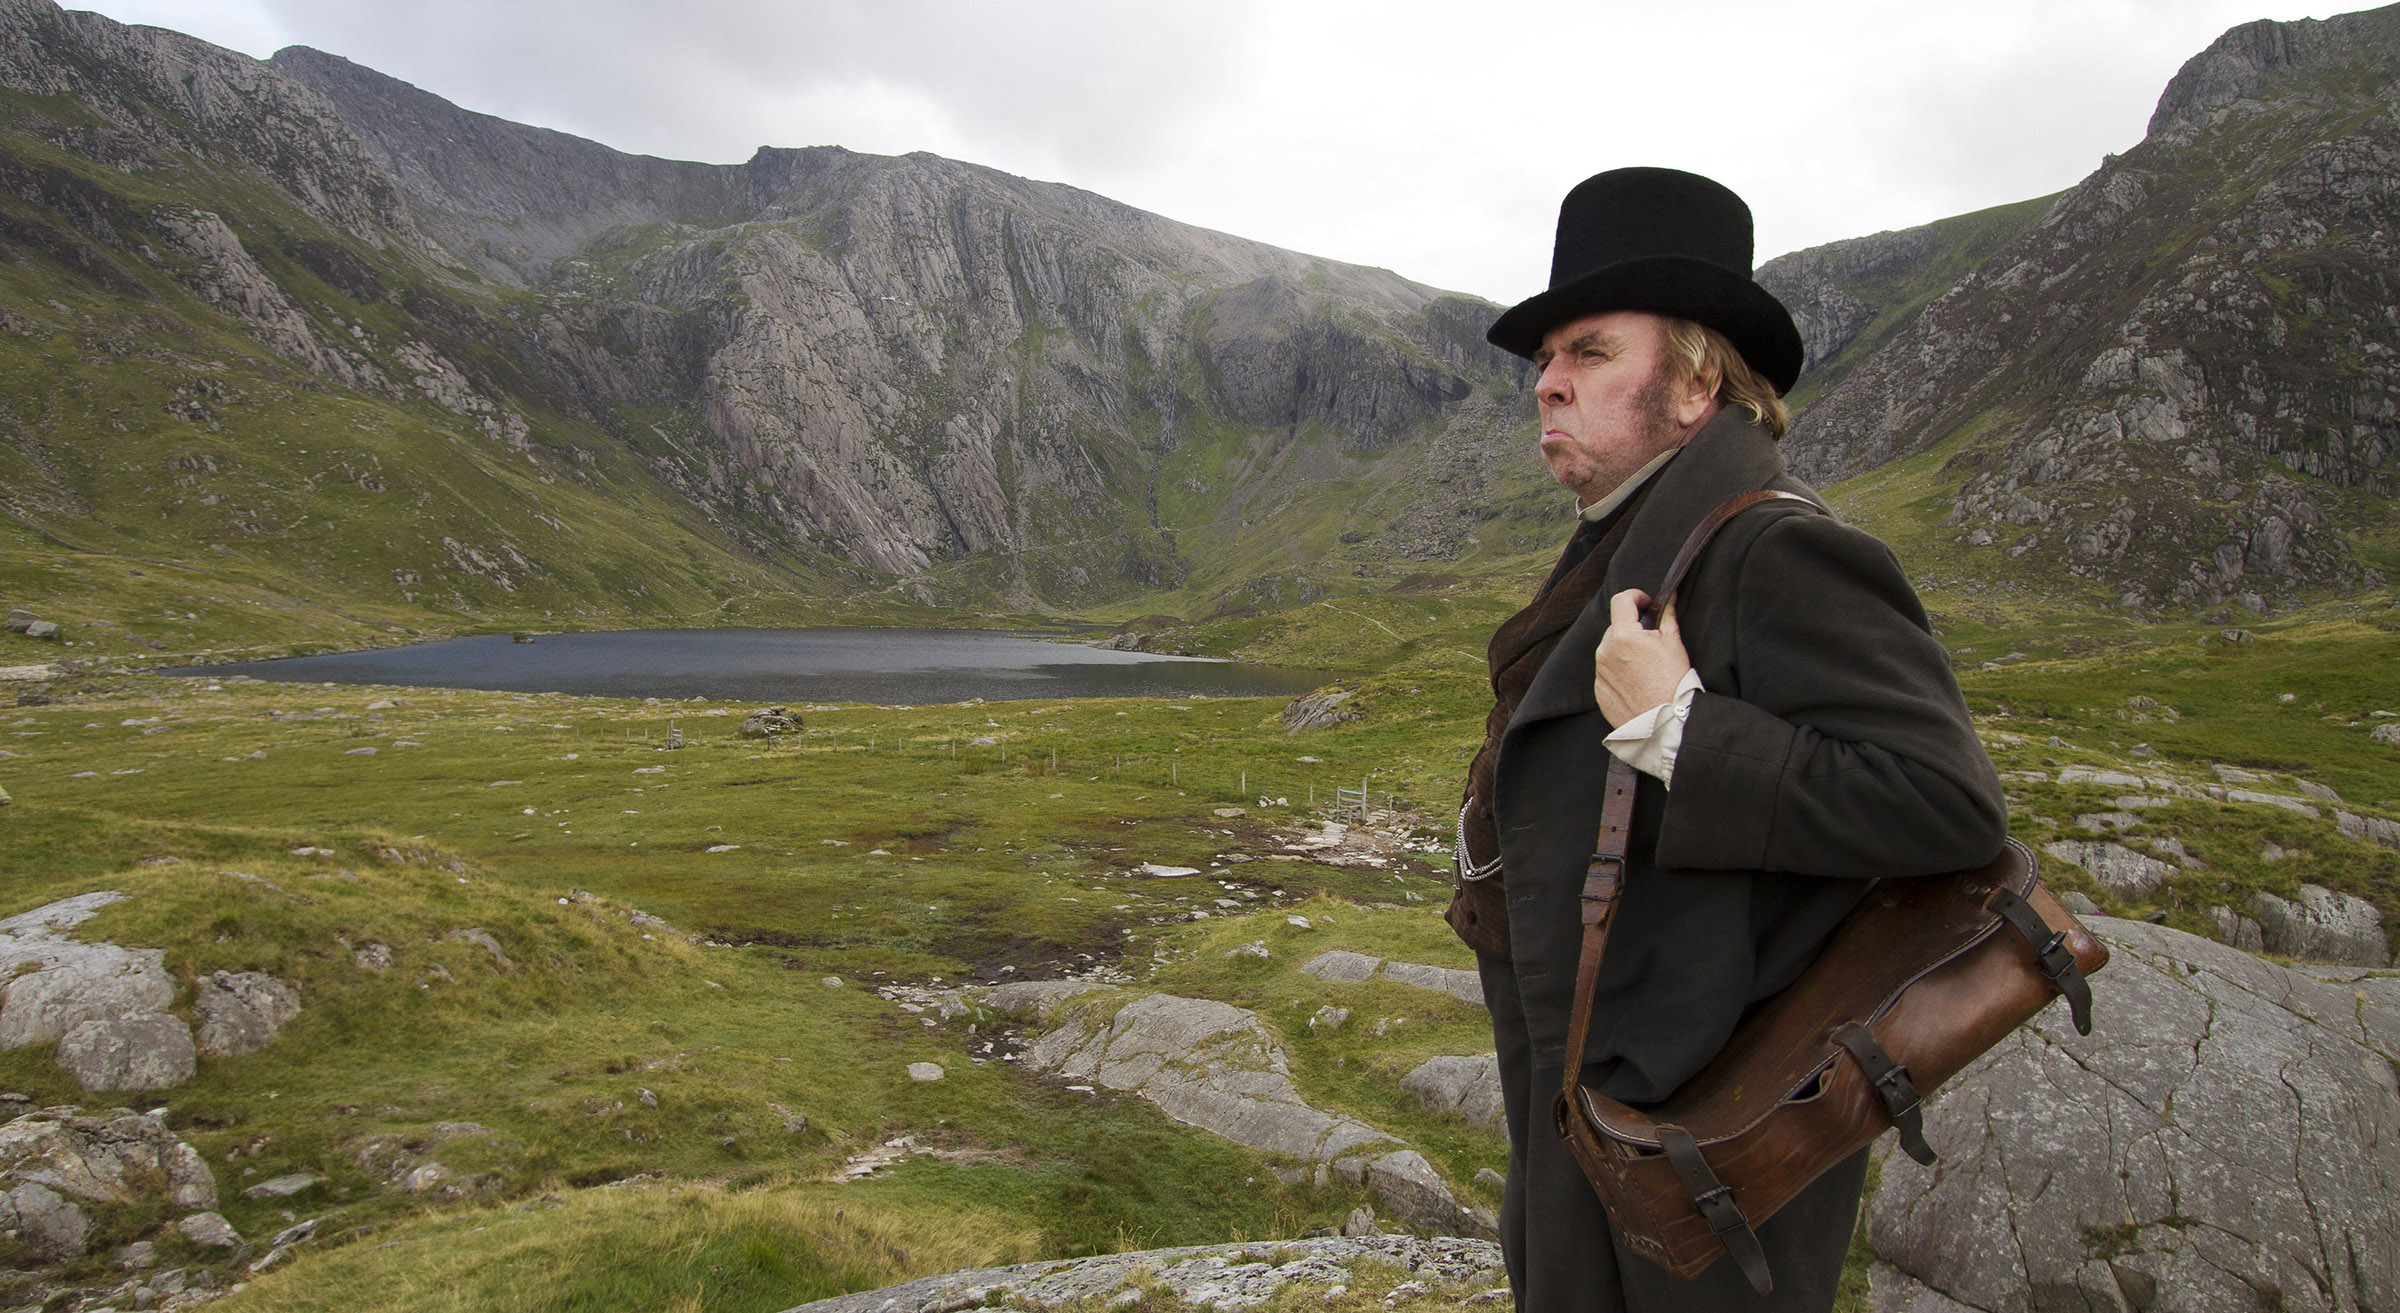 Timothy Spall in Mr. Turner.